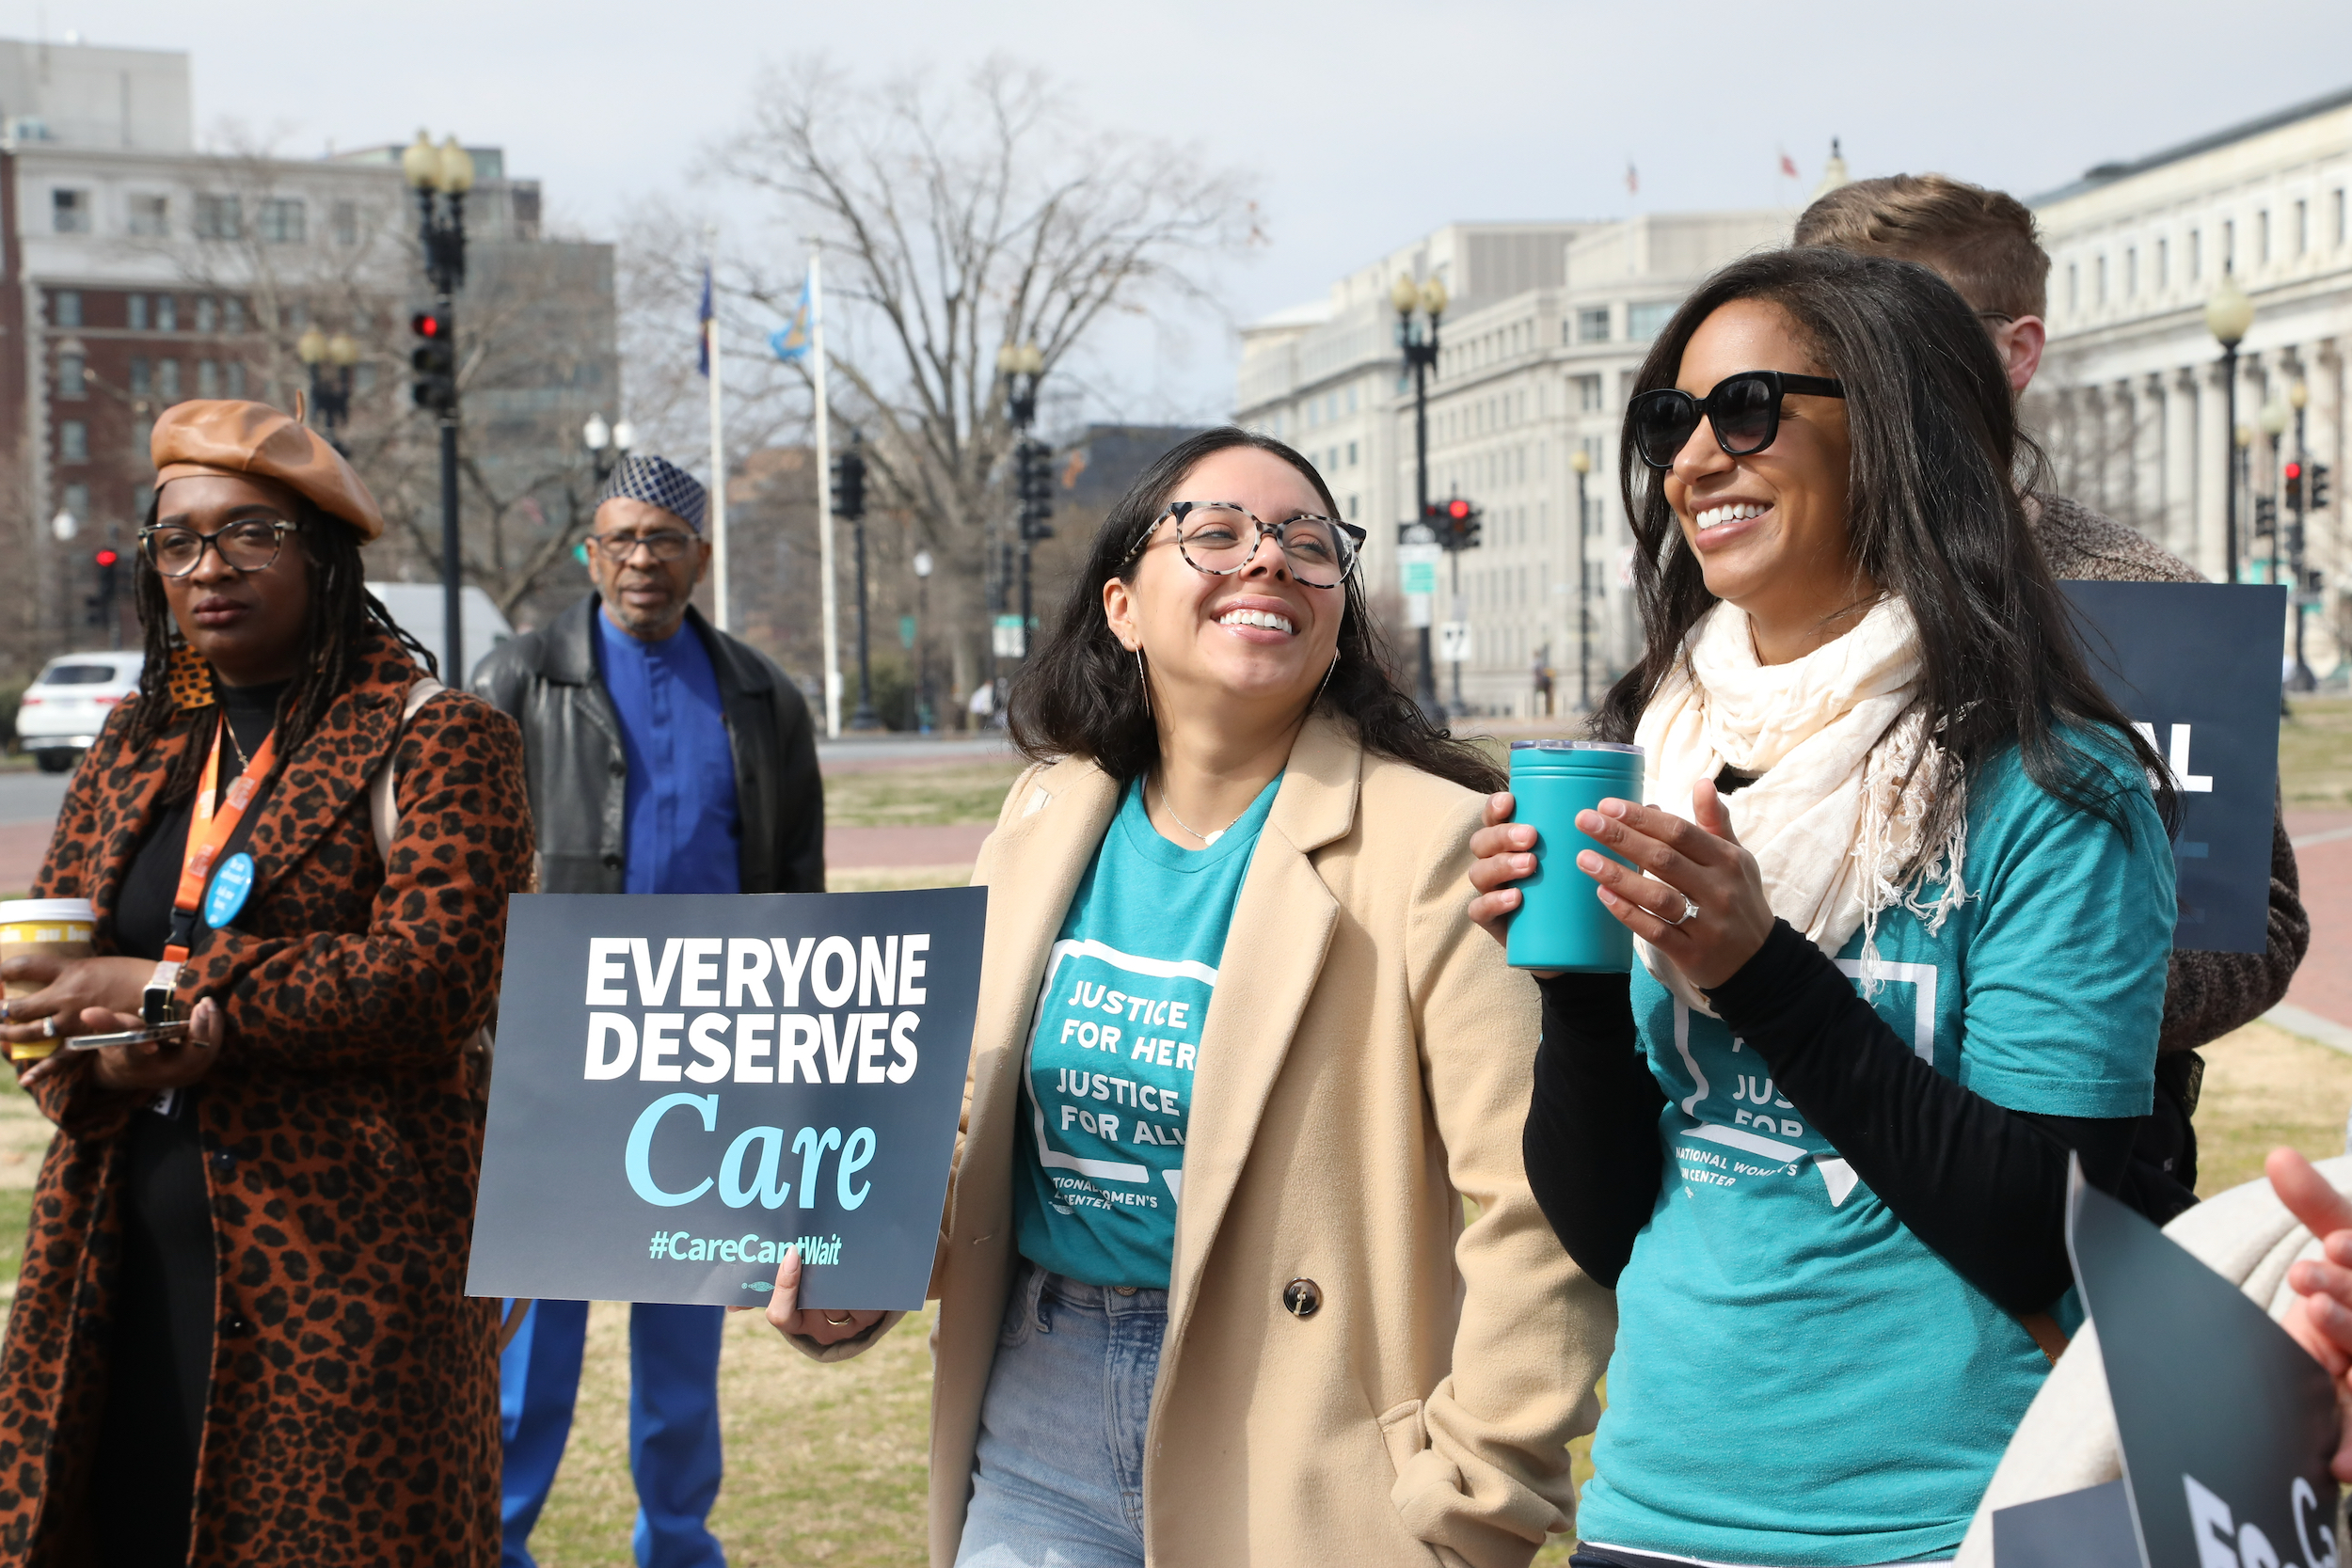 Two women smile together as one holds sign saying "Everyone deserves care"